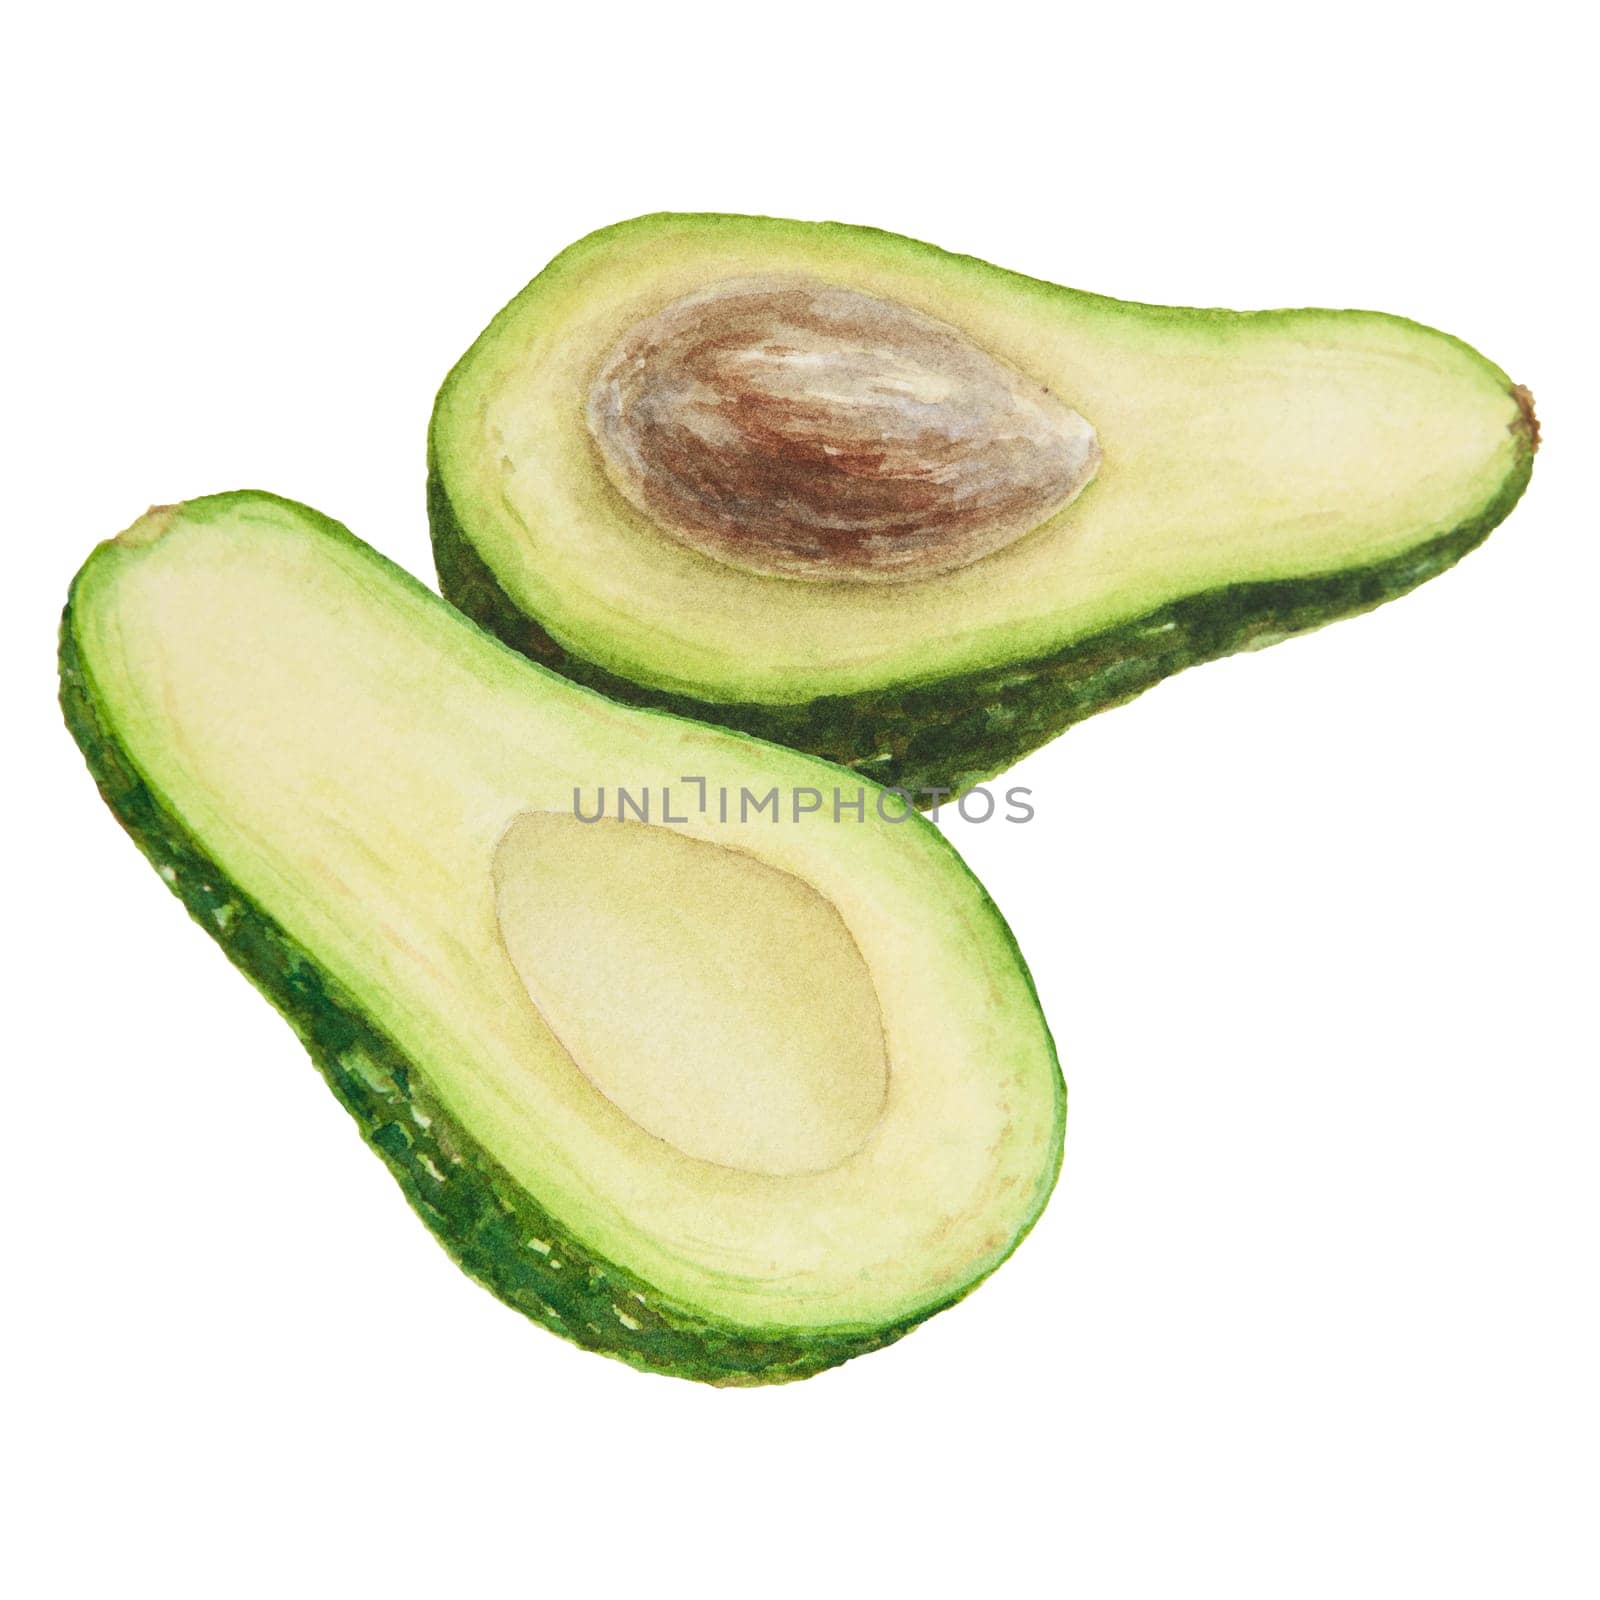 Avocado halves watercolor hand drawn realistic illustration. Green and fresh art of salad, sauce, guacamole, smoothie ingredient. For textile, menu, cards, paper, package, cooking books design